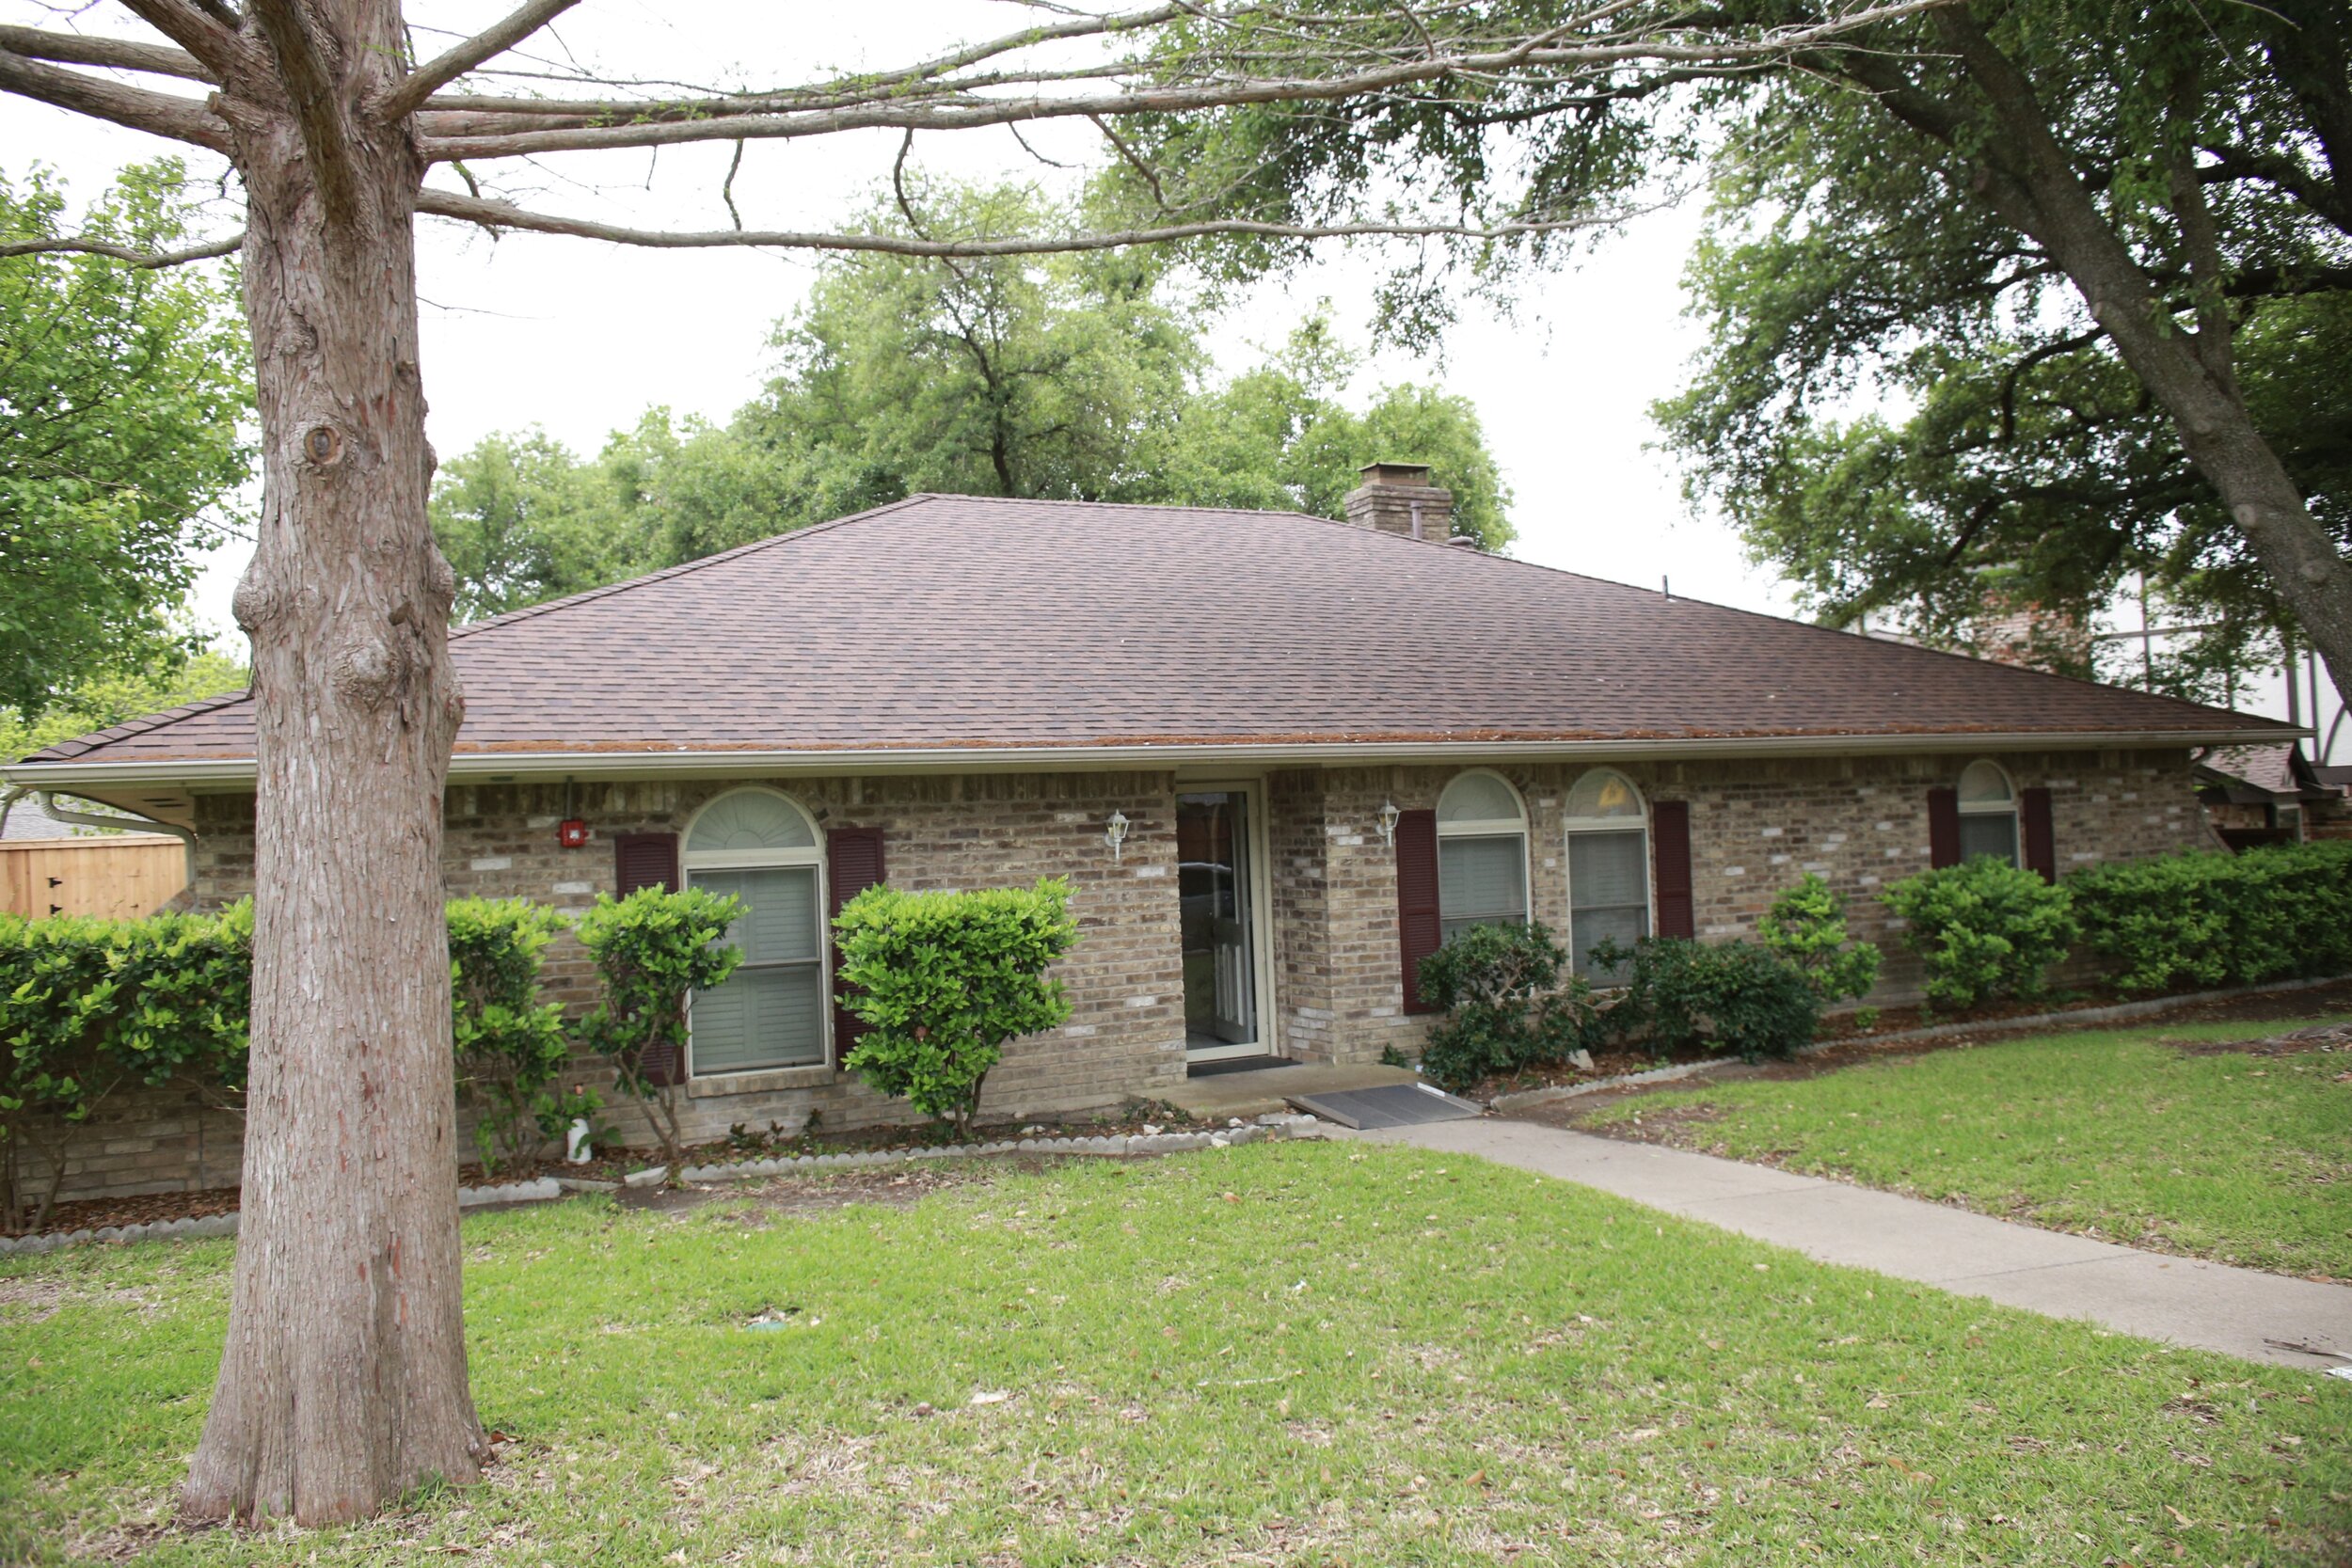 One of the residential houses in Dallas where adults with special needs are able to live independently.